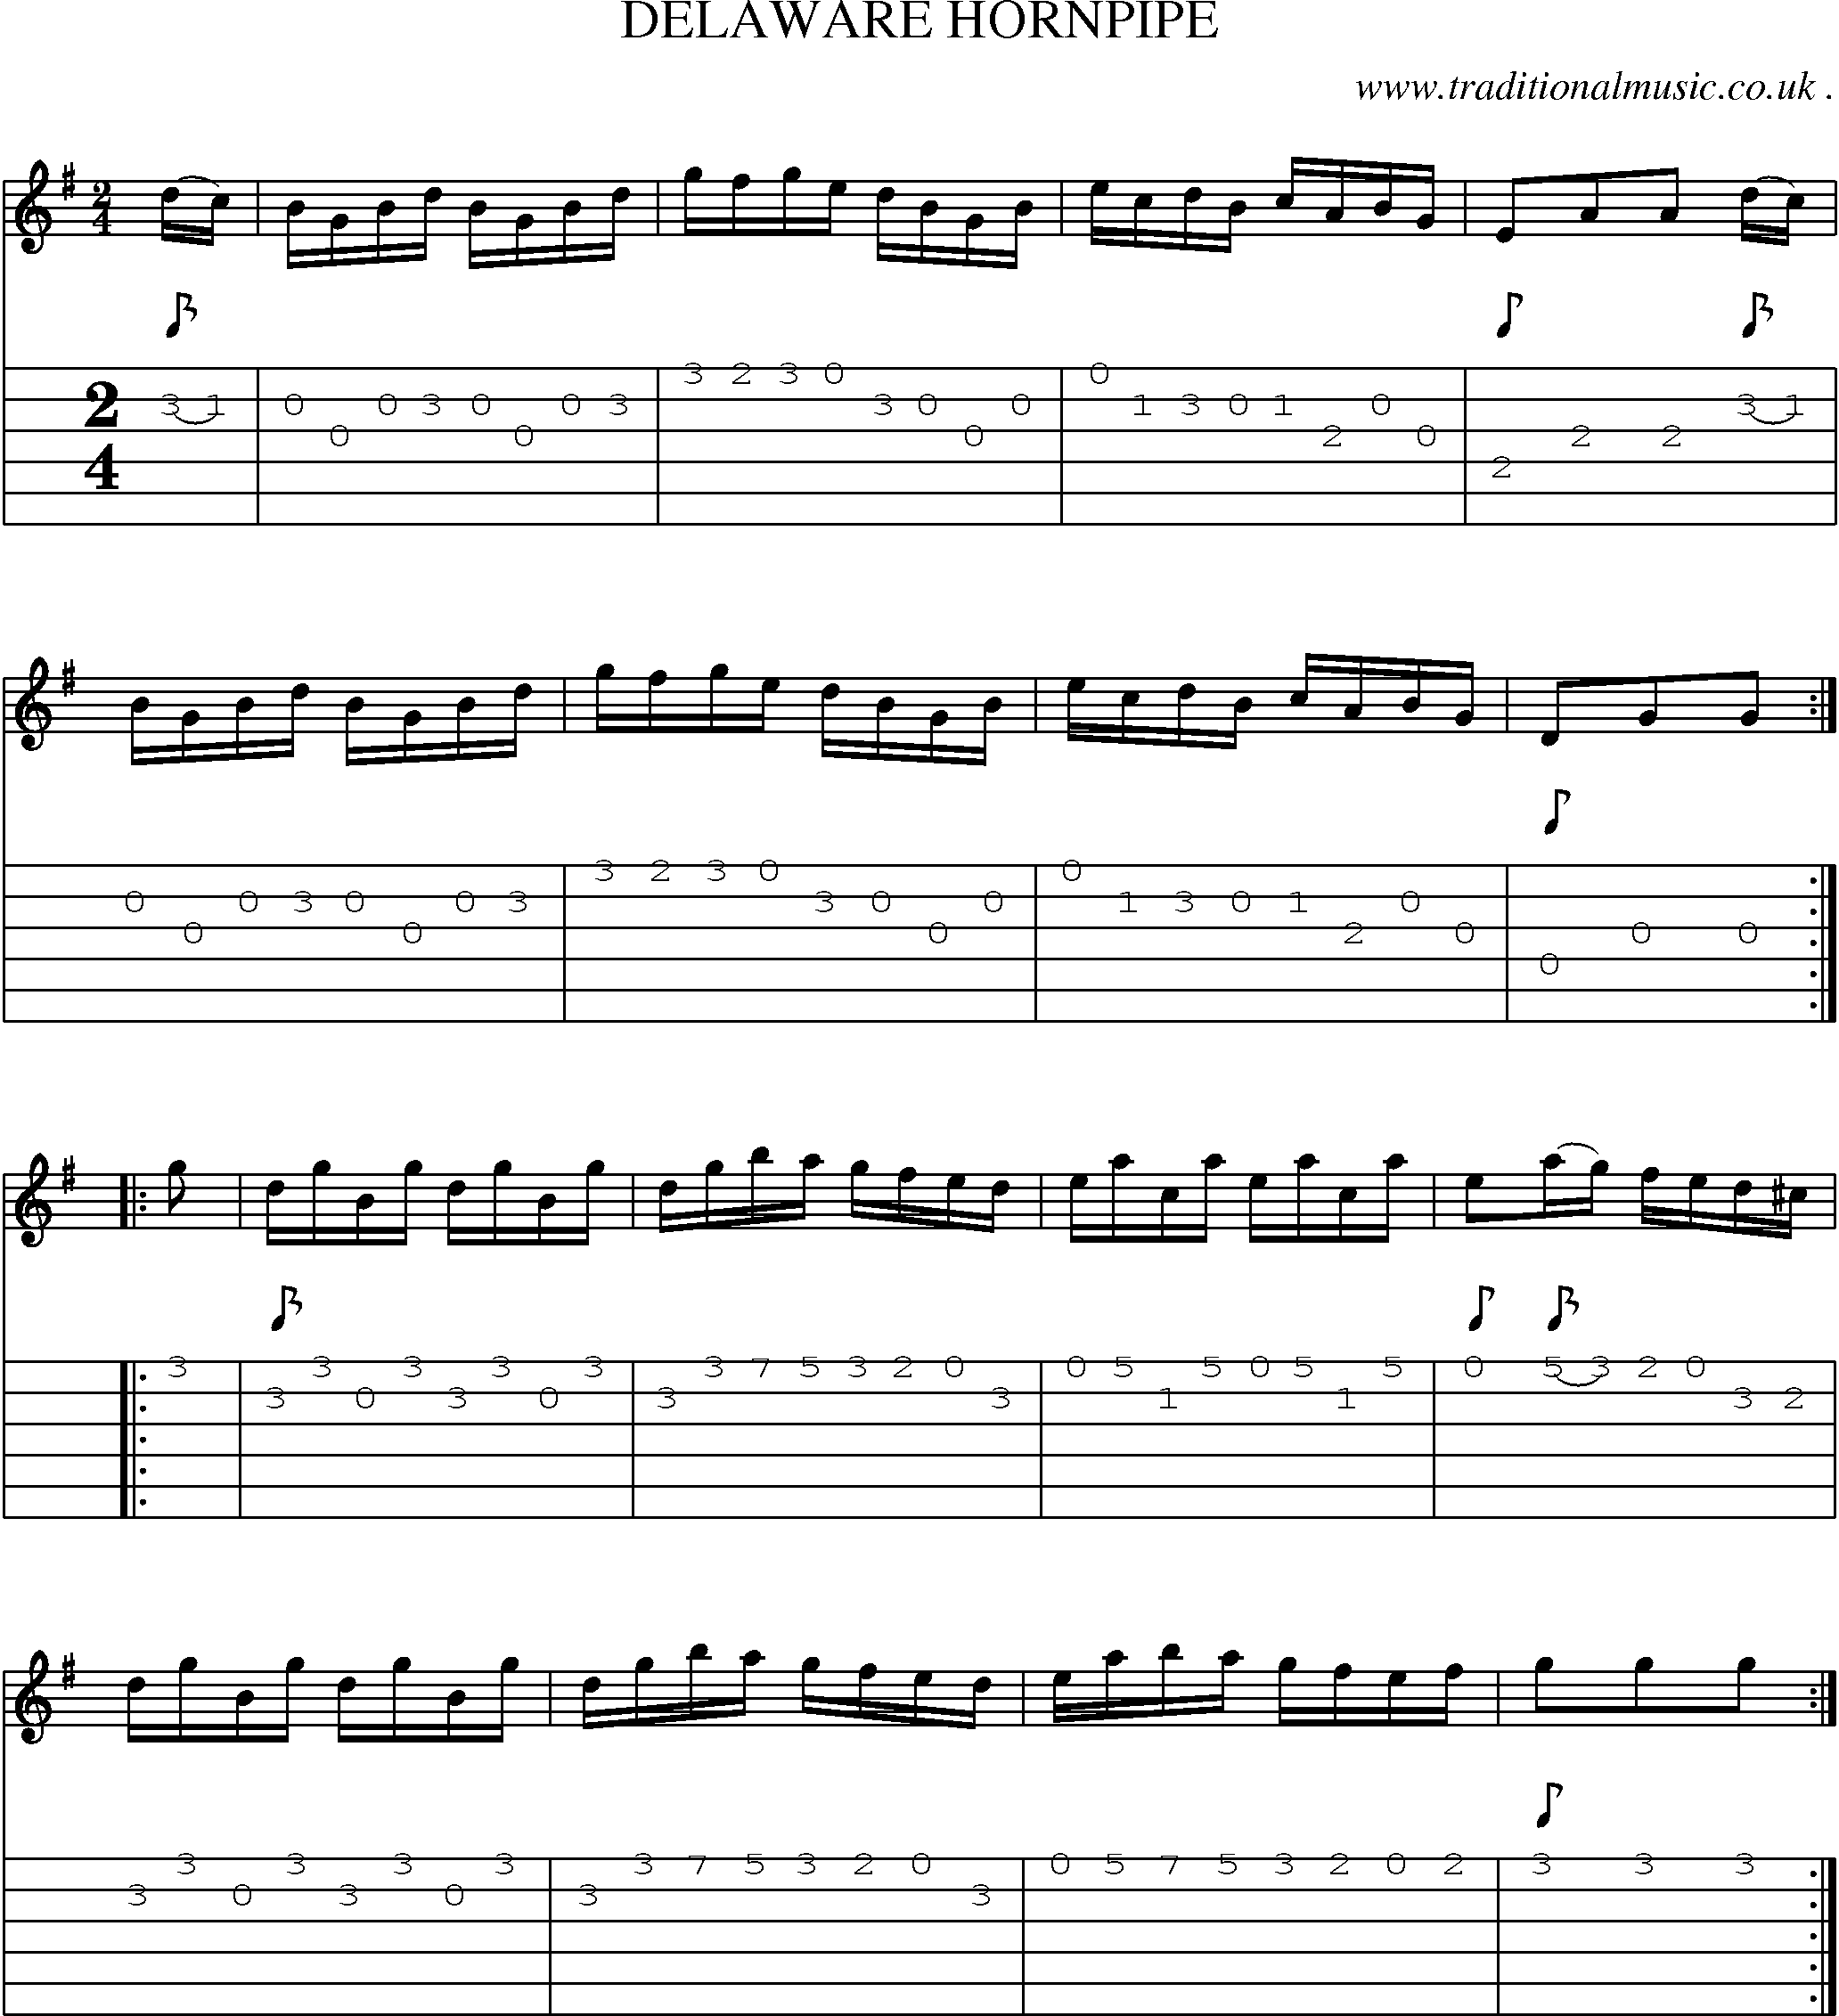 Music Score and Guitar Tabs for Delaware Hornpipe